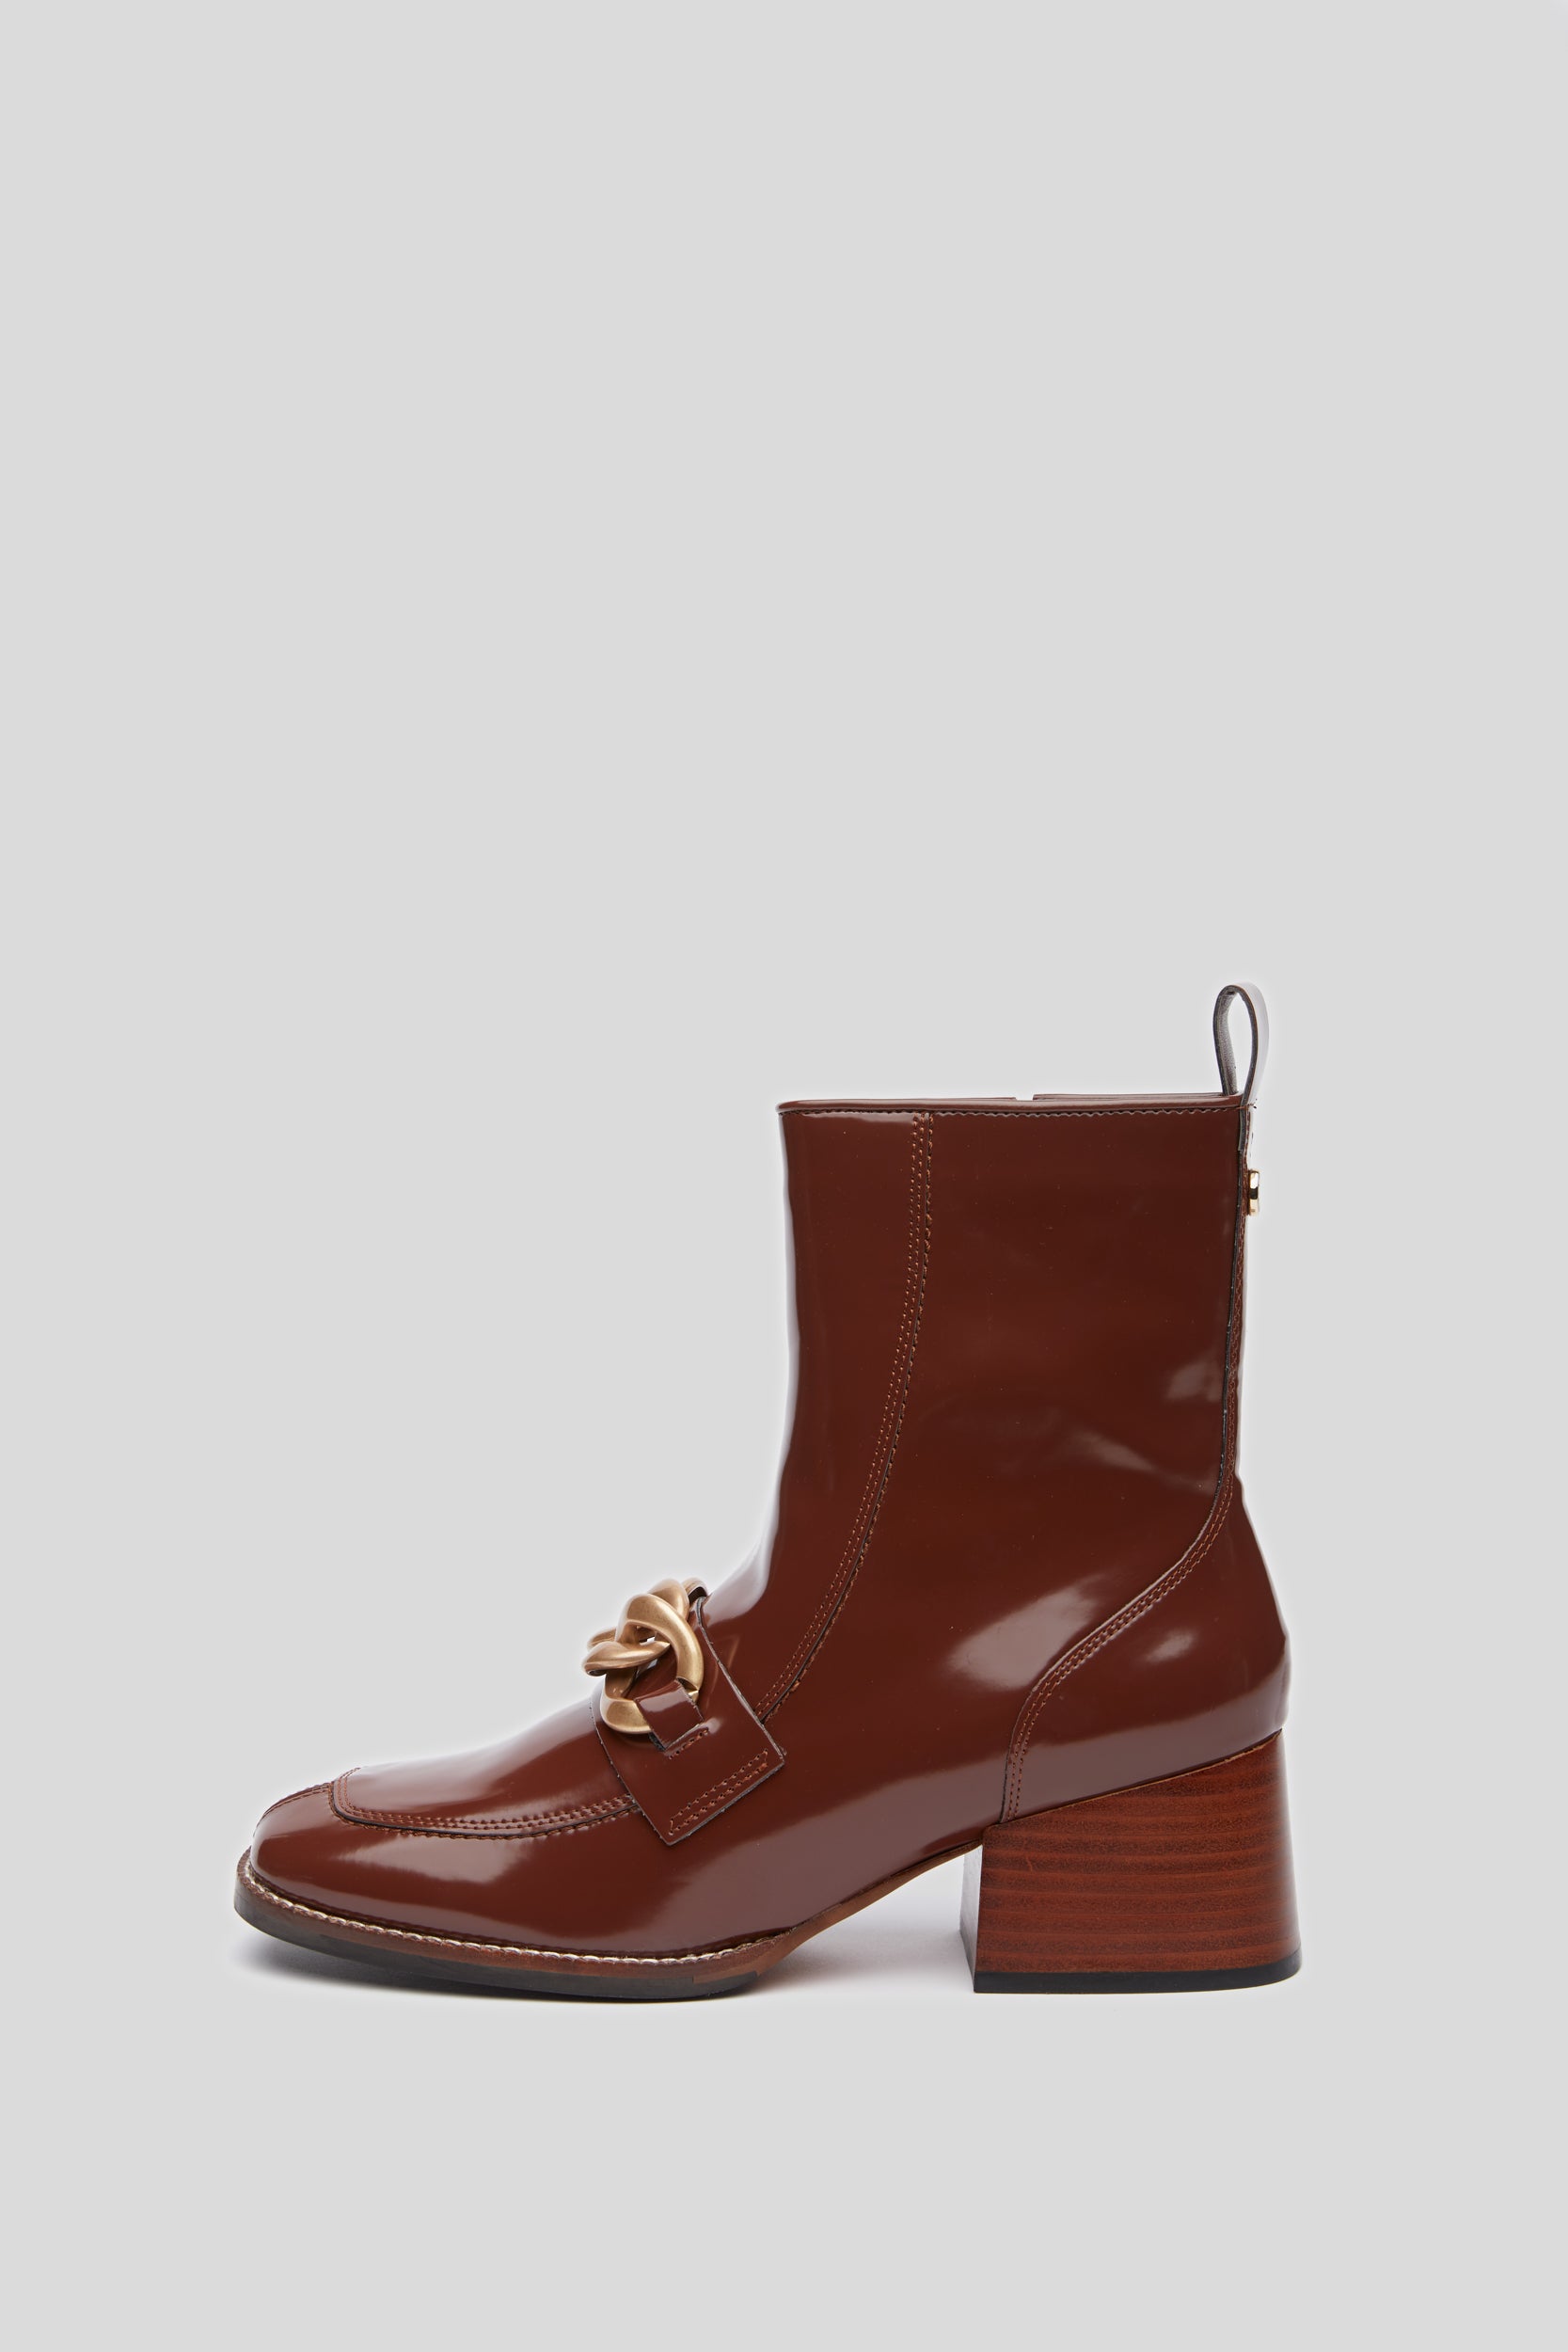 STEVE MADDEN "Loreen" Brown Ankle Boots